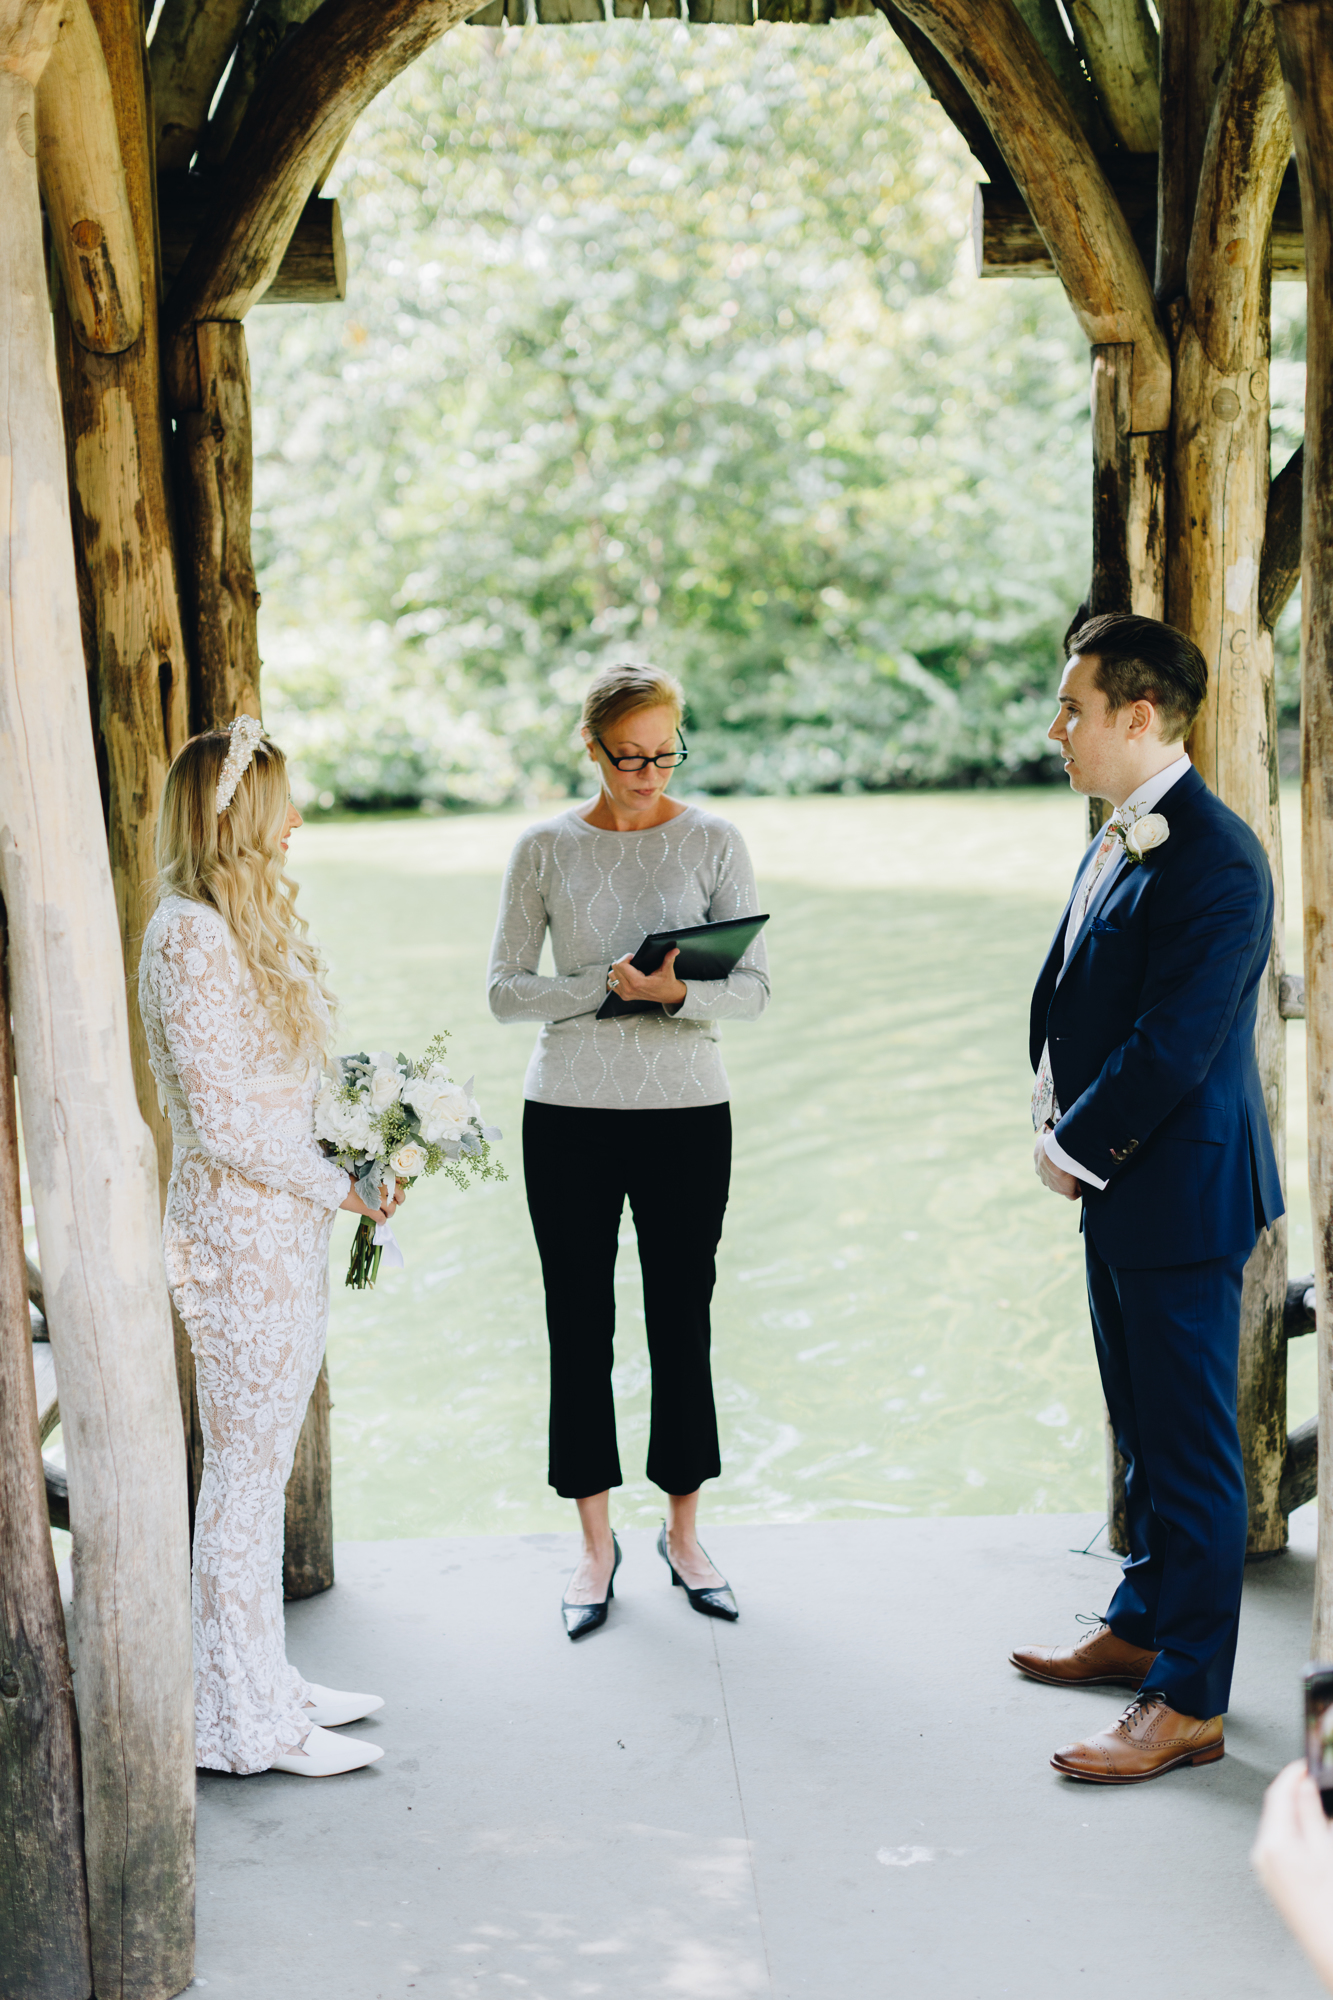 Stunning Wagner Cove Elopement in Central Park